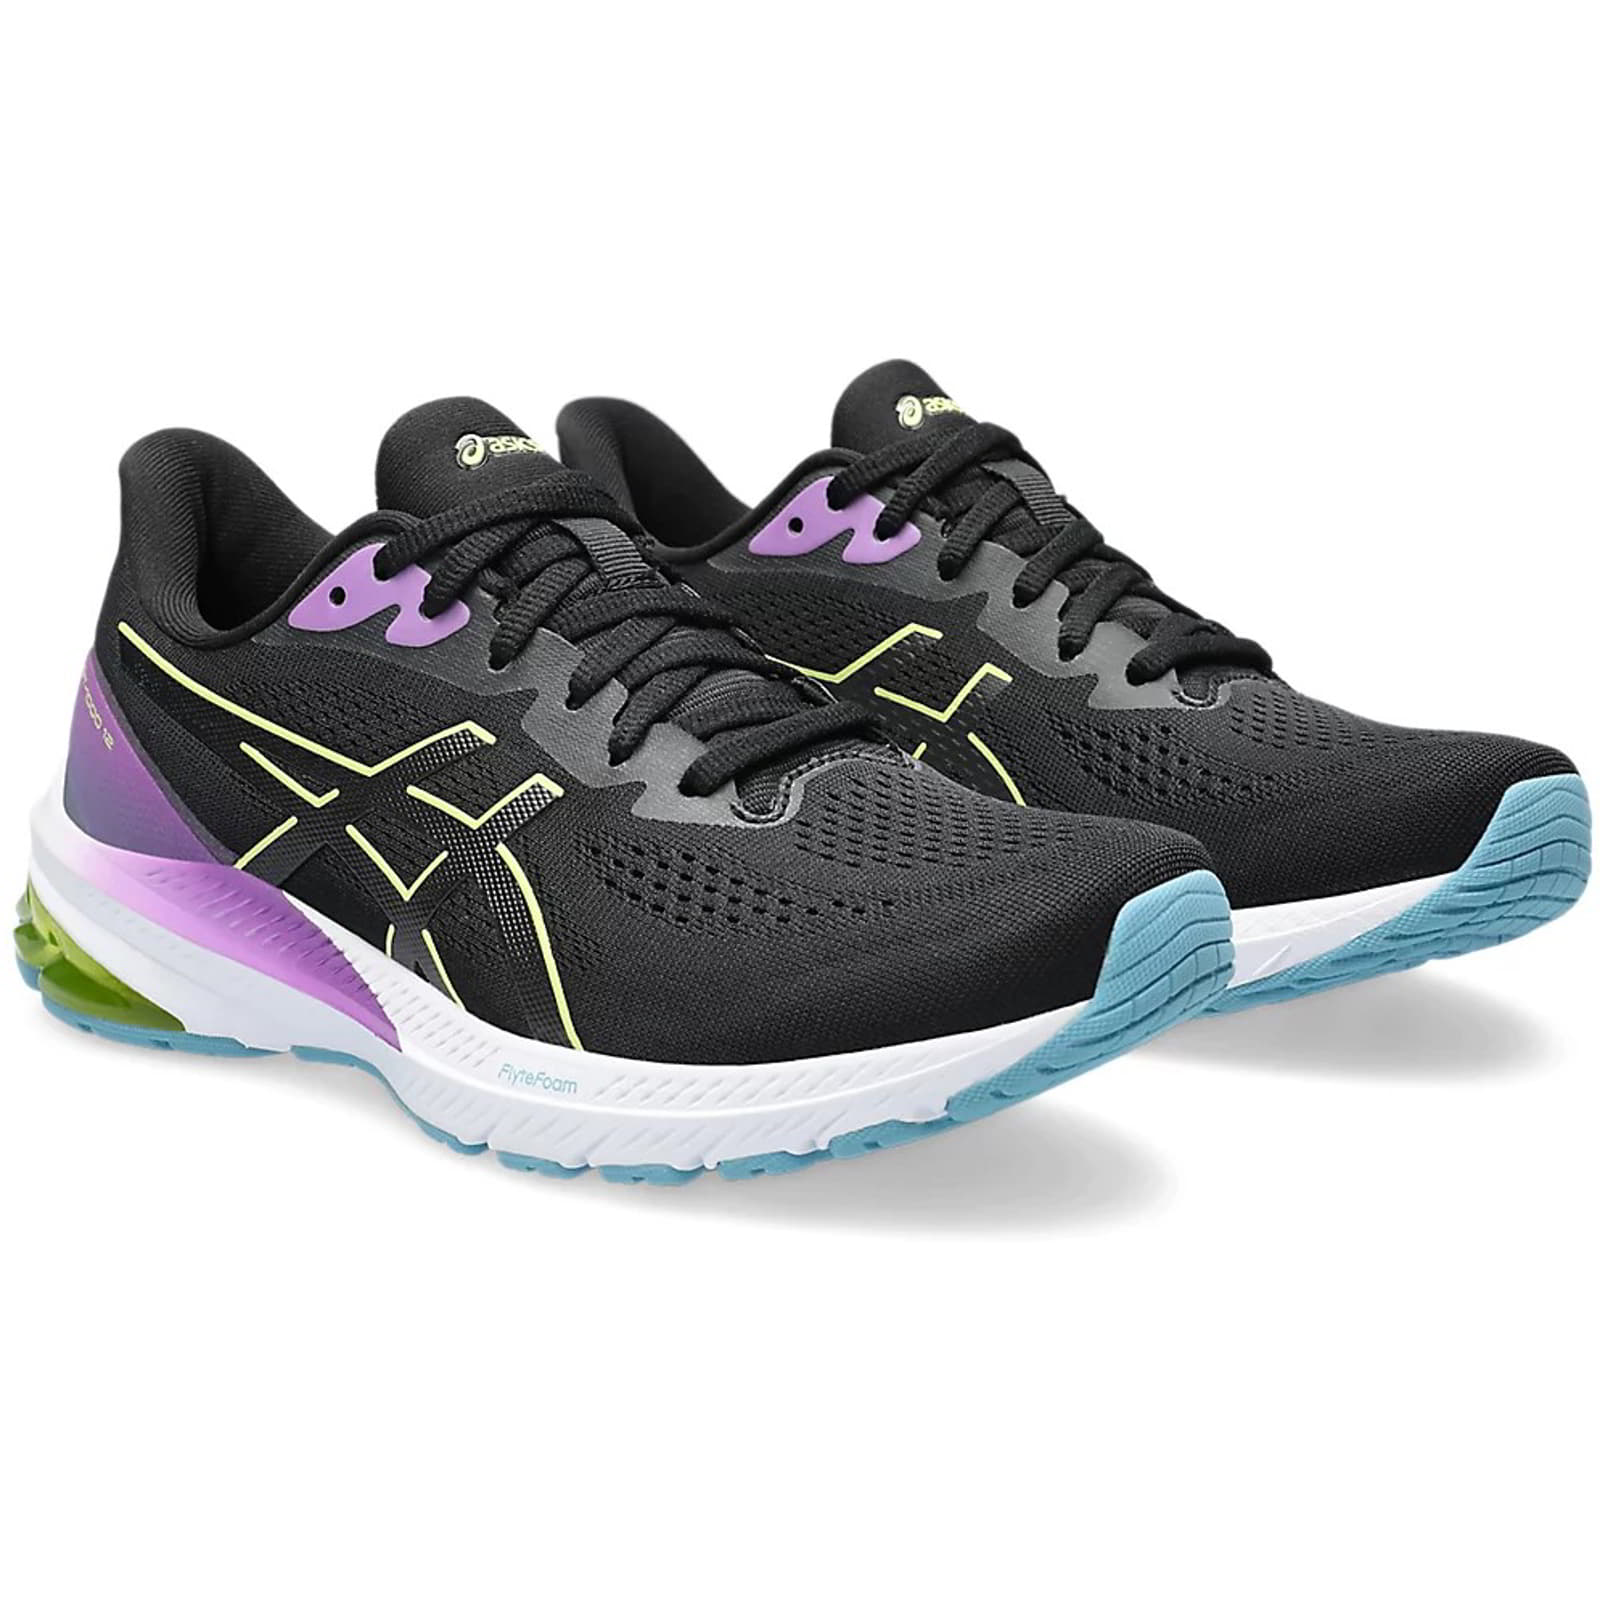 Asics Women's GT-1000 12 Running Shoes Trainers - UK 7.5